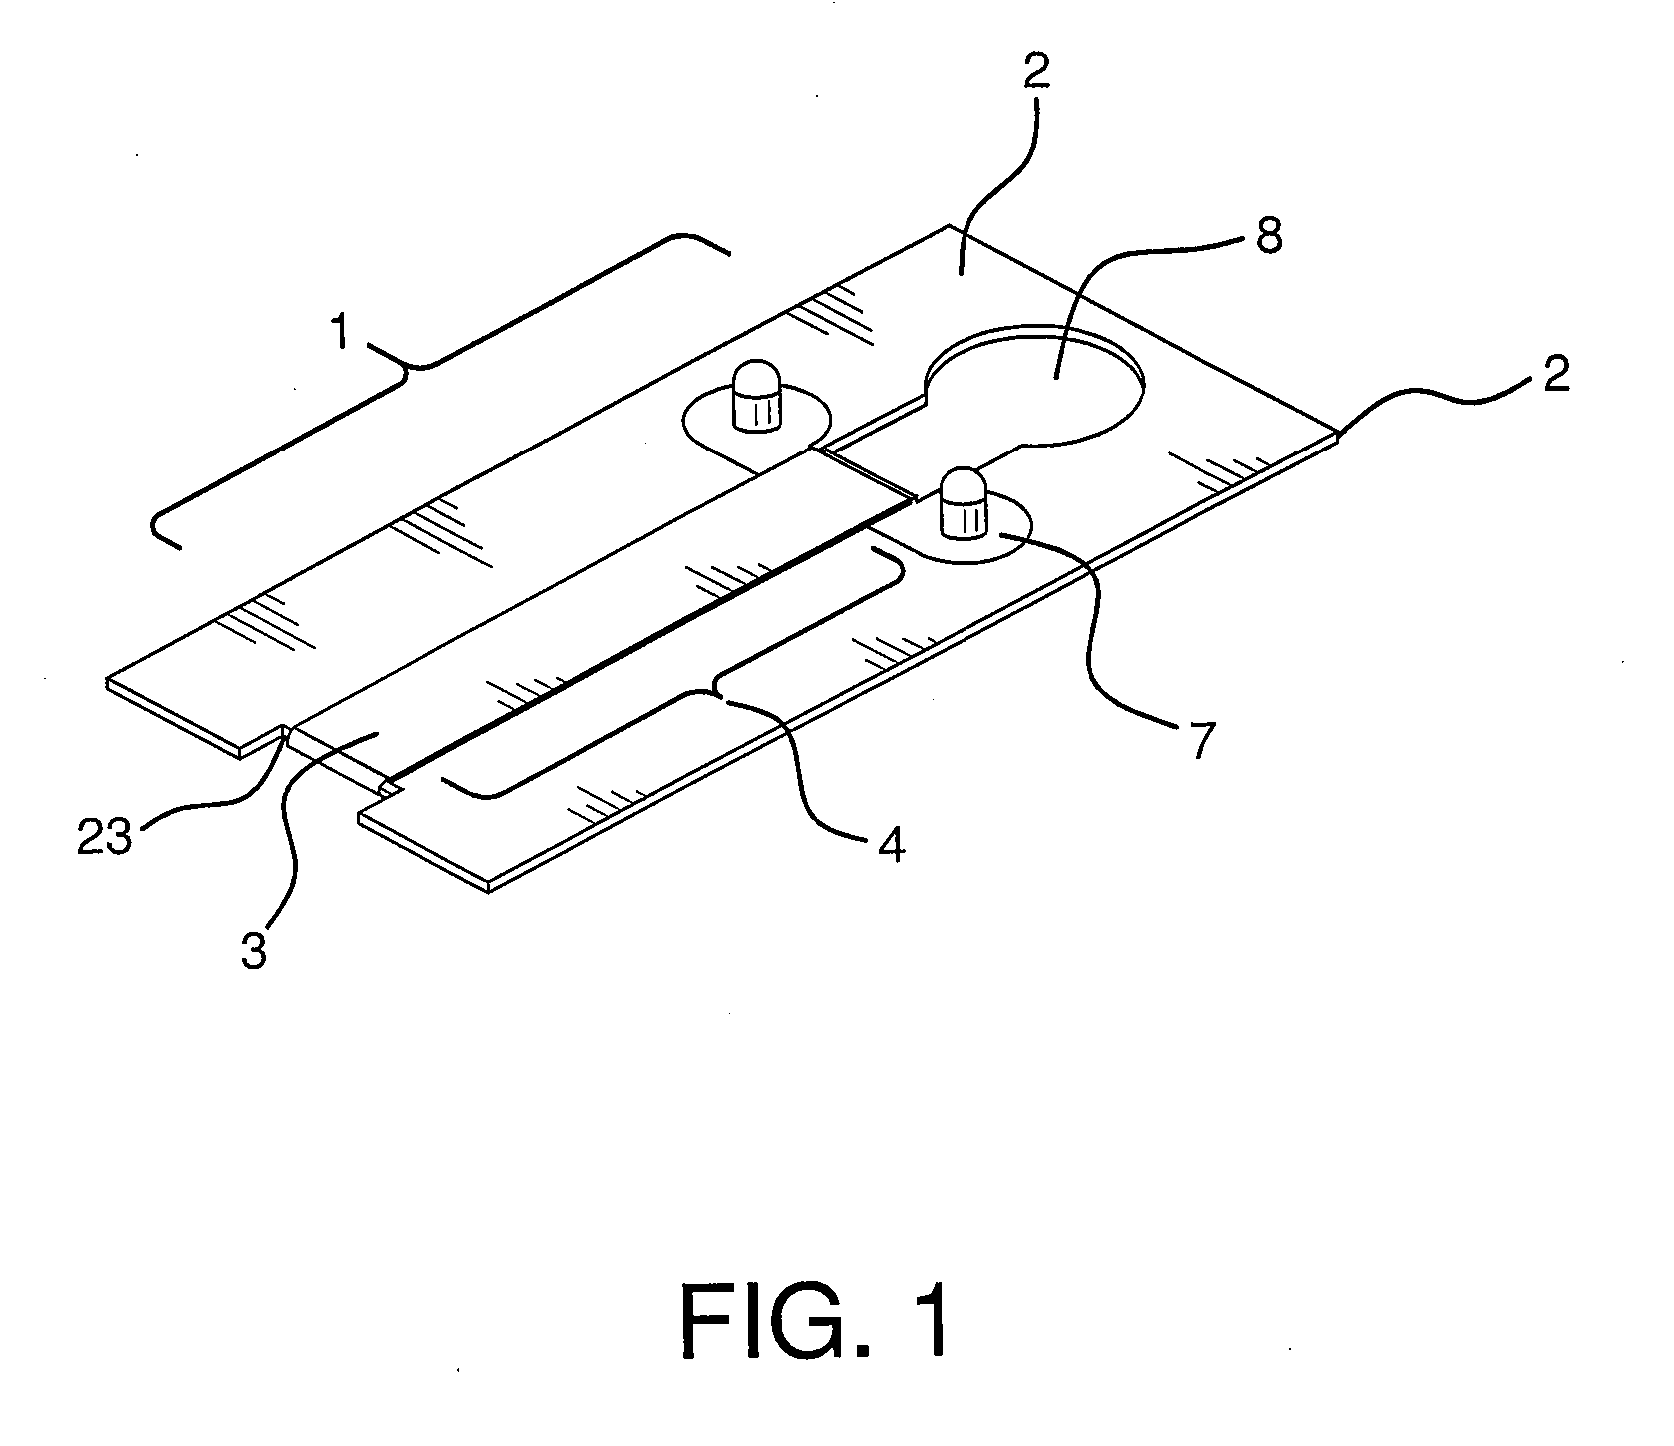 Apparatus for supplying surgical staple line reinforcement